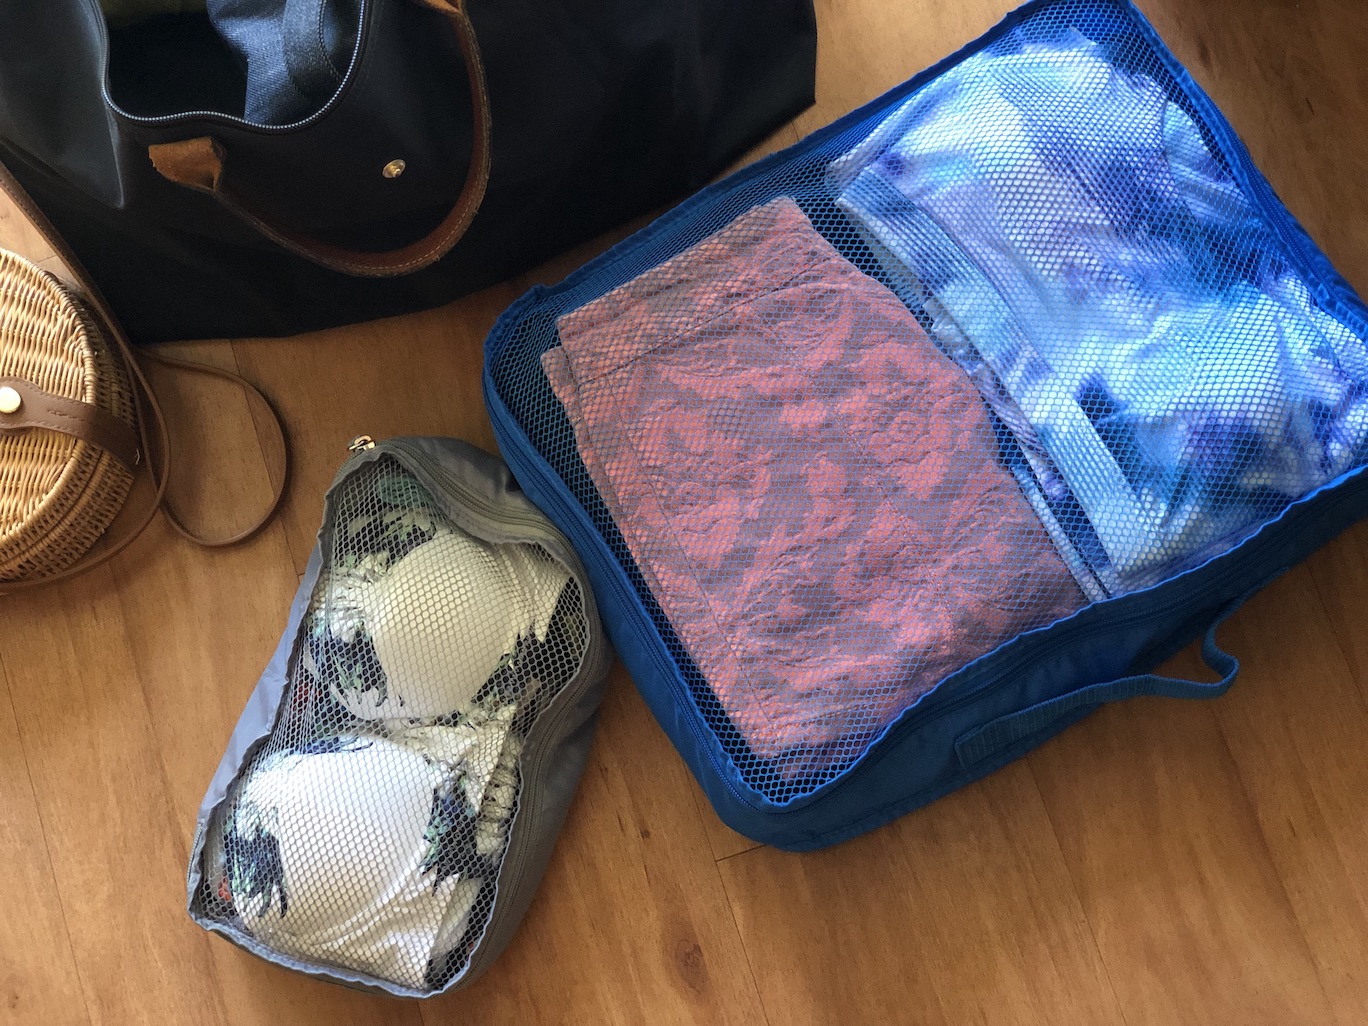 Packing Cubes